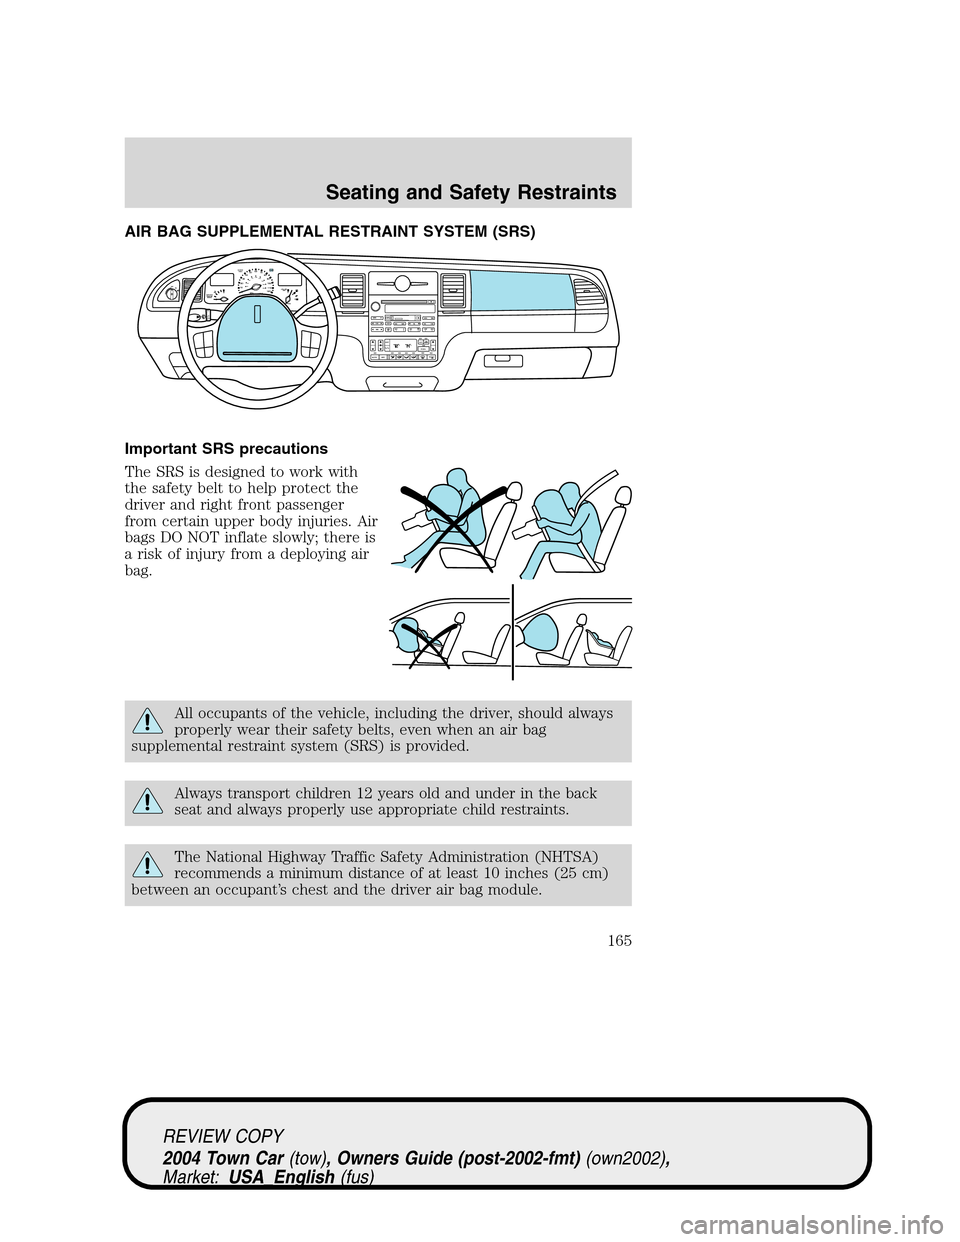 LINCOLN TOWN CAR 2004  Owners Manual AIR BAG SUPPLEMENTAL RESTRAINT SYSTEM (SRS)
Important SRS precautions
The SRS is designed to work with
the safety belt to help protect the
driver and right front passenger
from certain upper body inju